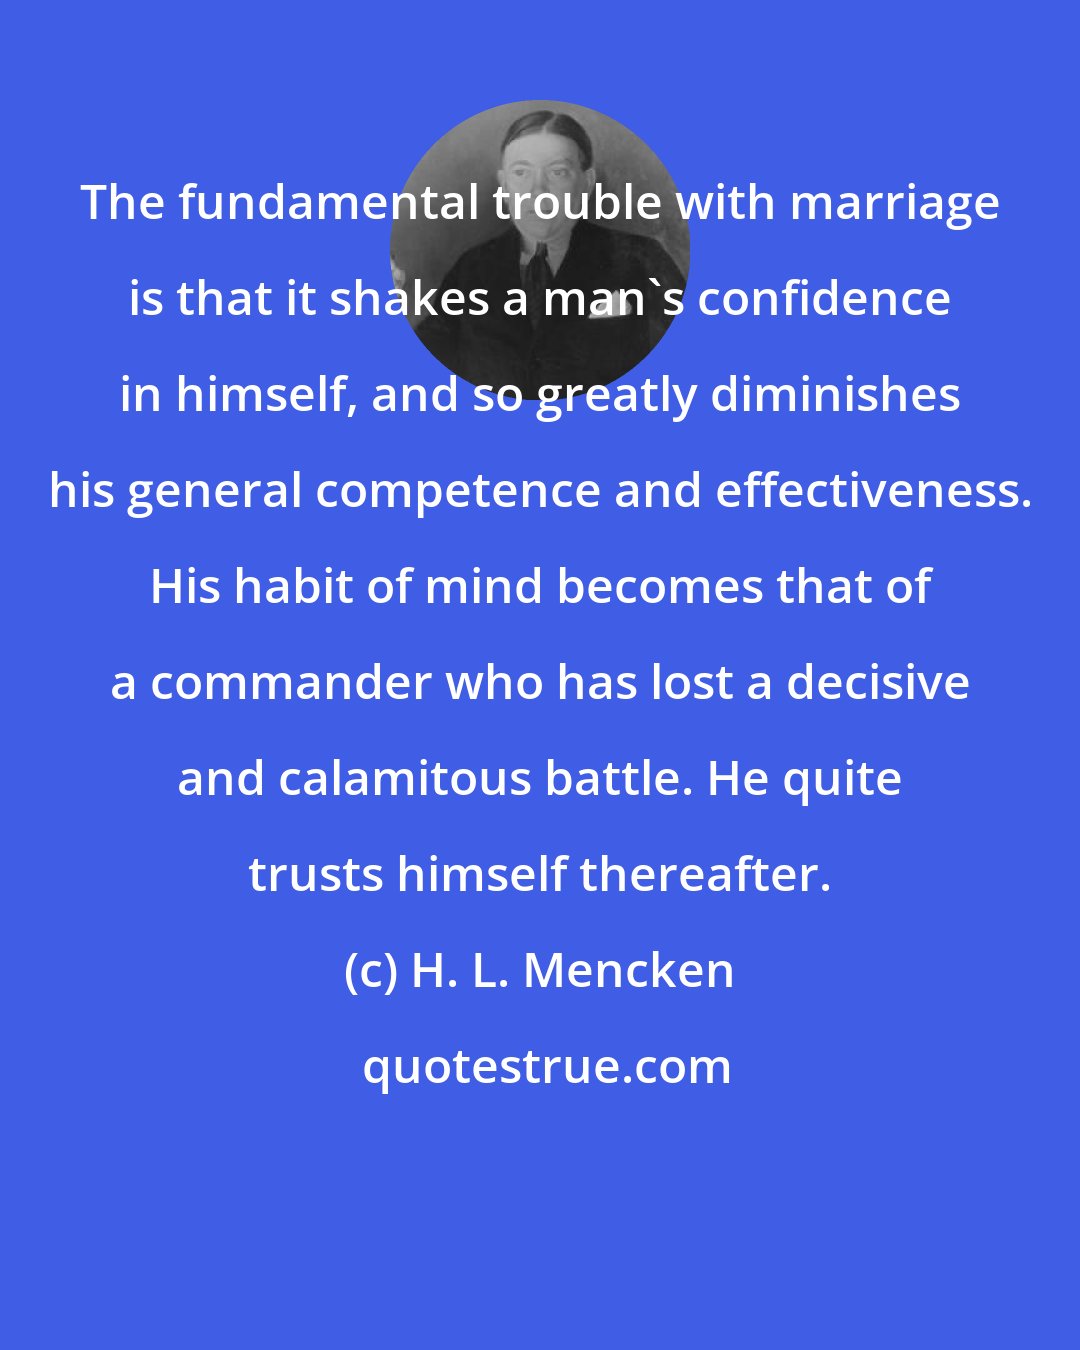 H. L. Mencken: The fundamental trouble with marriage is that it shakes a man's confidence in himself, and so greatly diminishes his general competence and effectiveness. His habit of mind becomes that of a commander who has lost a decisive and calamitous battle. He quite trusts himself thereafter.